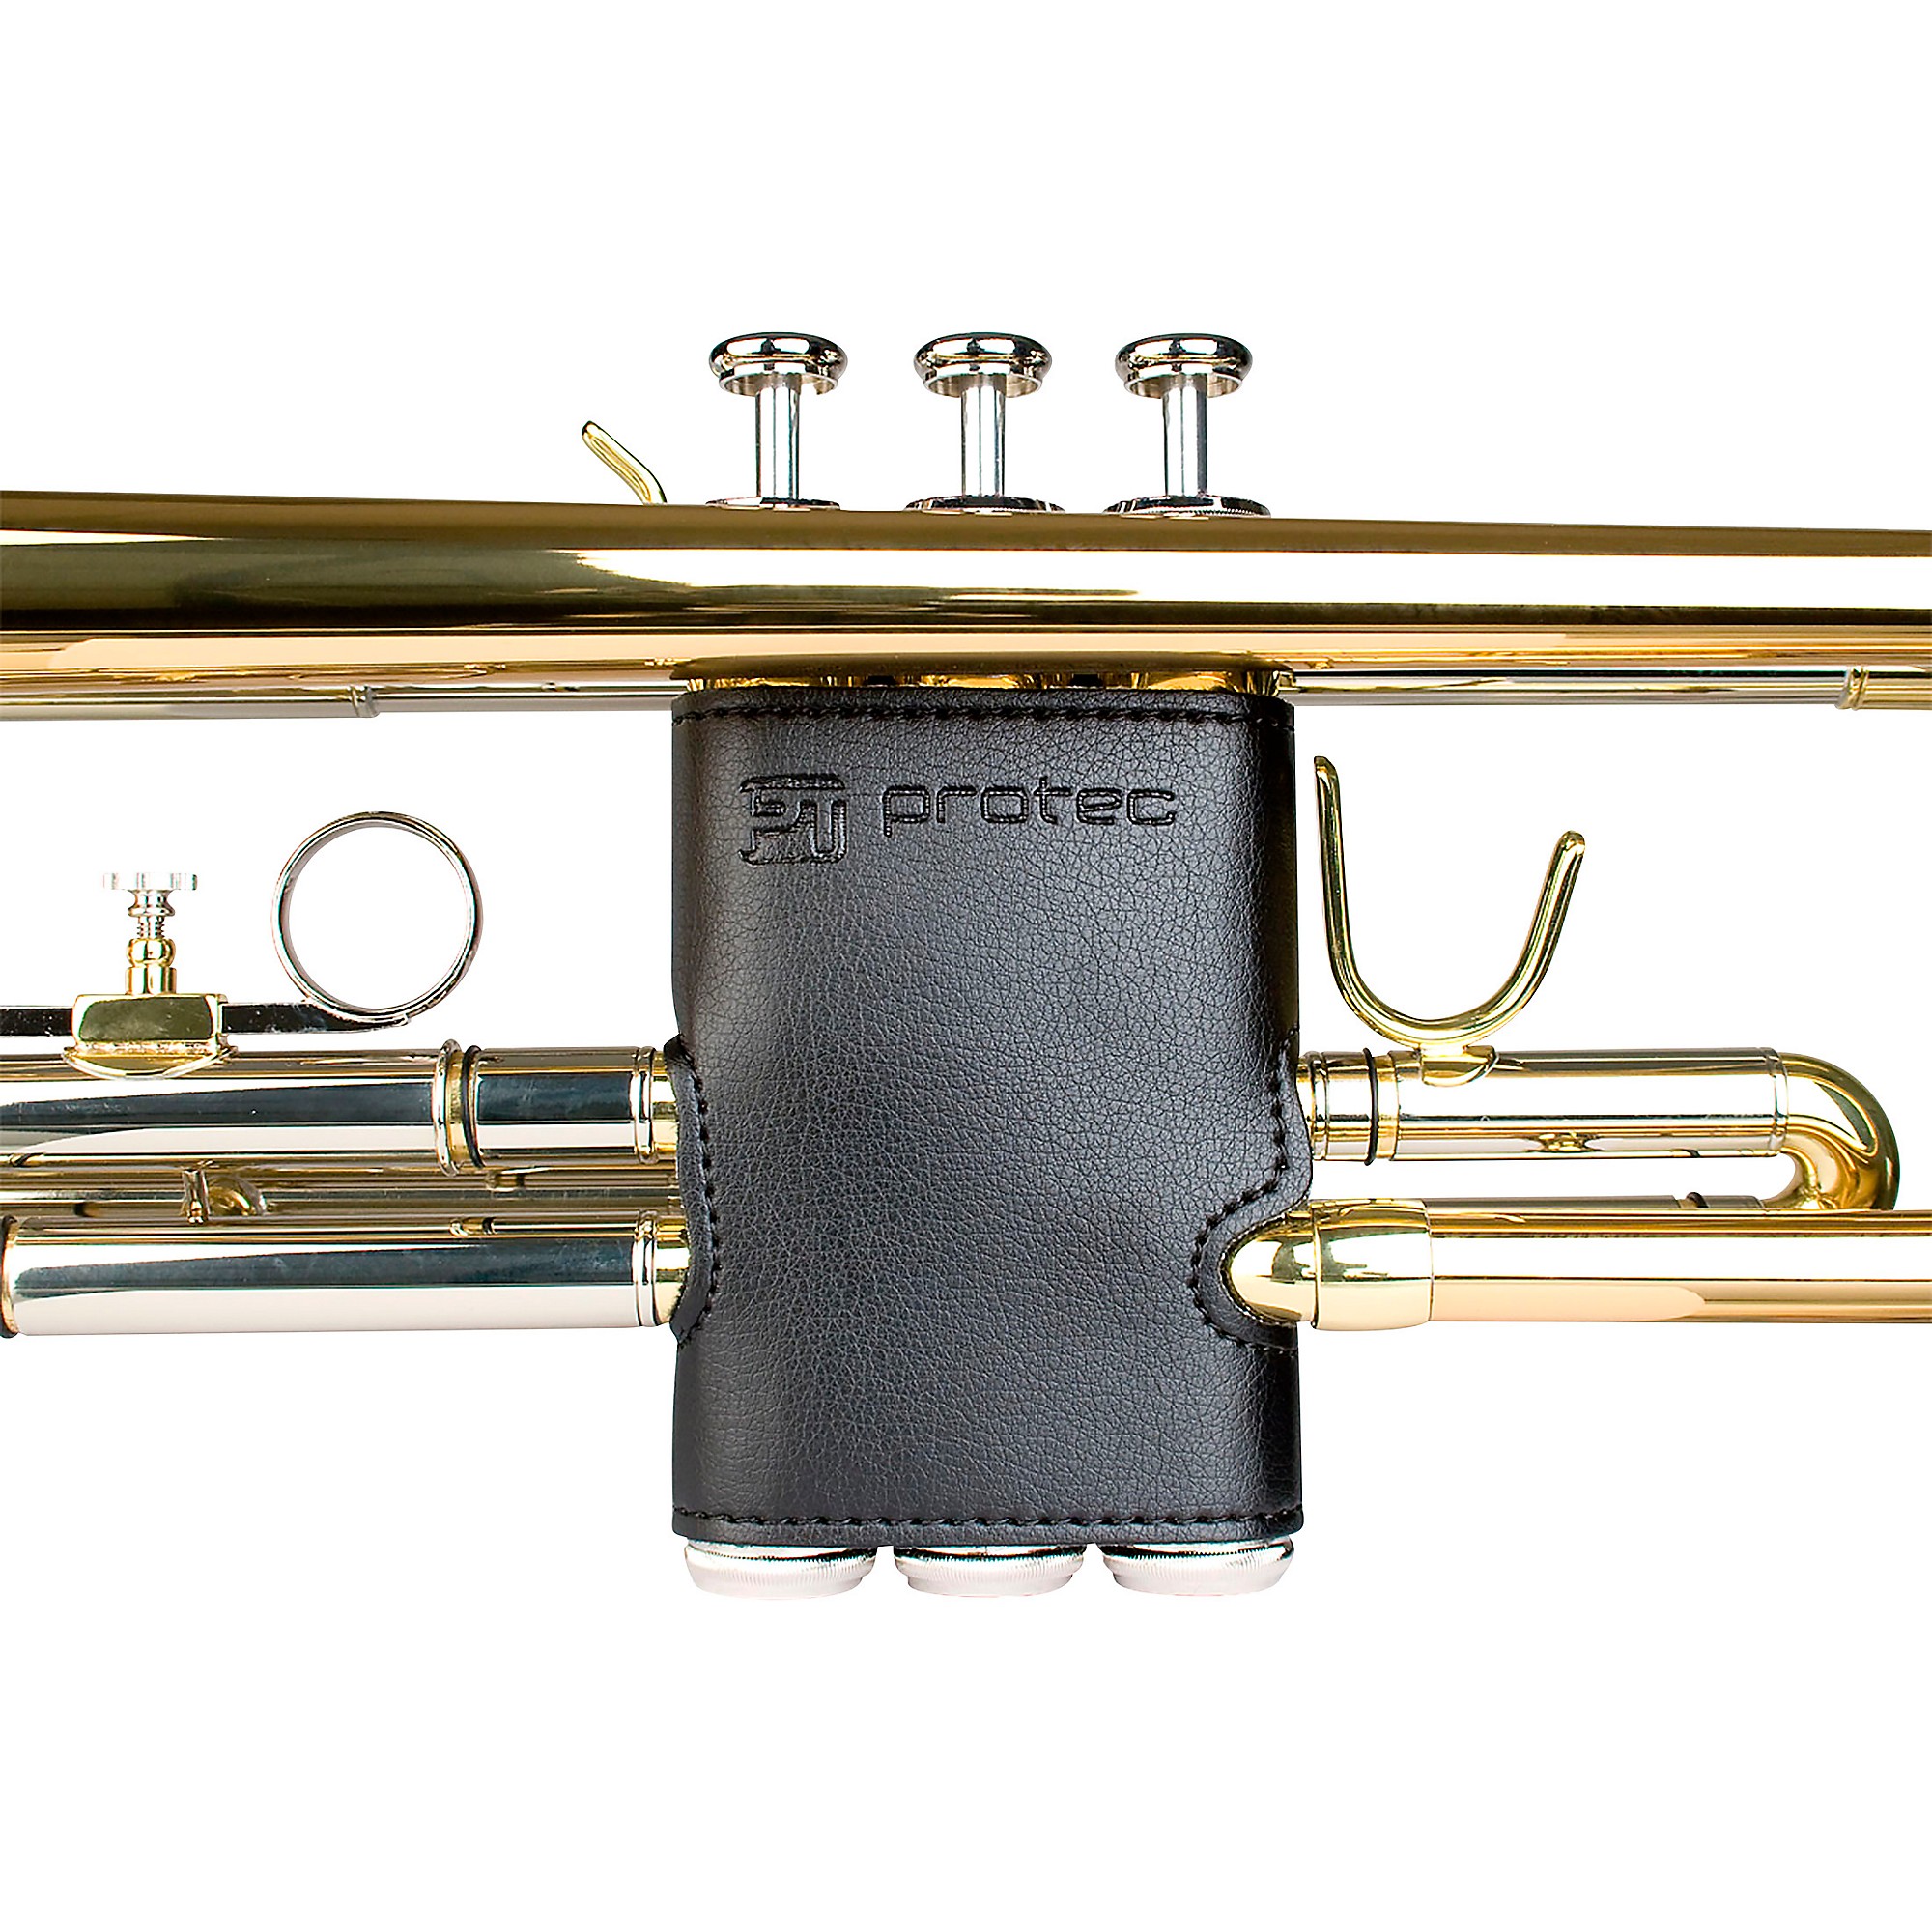 EXCEART Trumpet Leather Valve Guard Use As Protection From Corrosion Scratches and Stains Protects Instruments Finish 